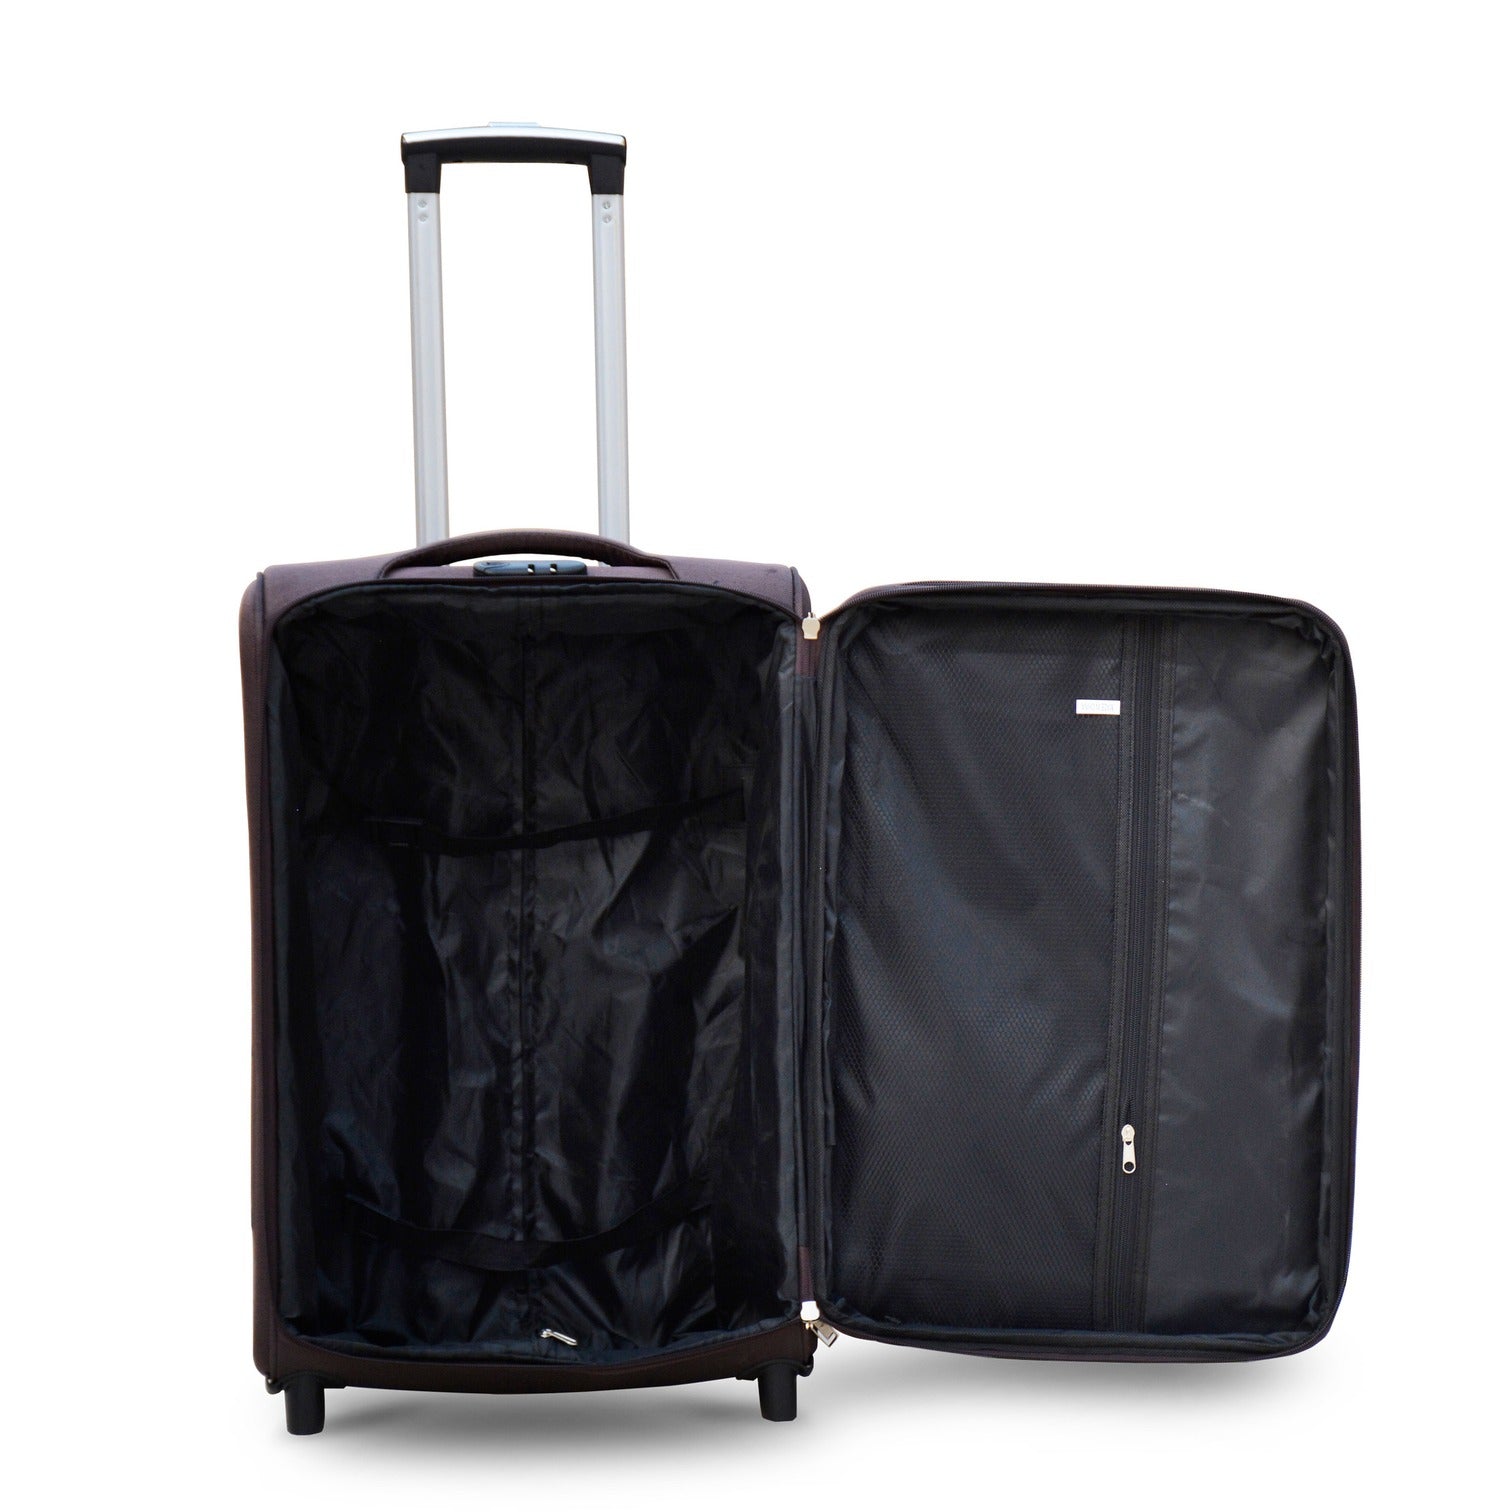 28" Coffee Colour LP 2 Wheel 0161 Luggage Lightweight Soft Material Trolley Bag Zaappy.com